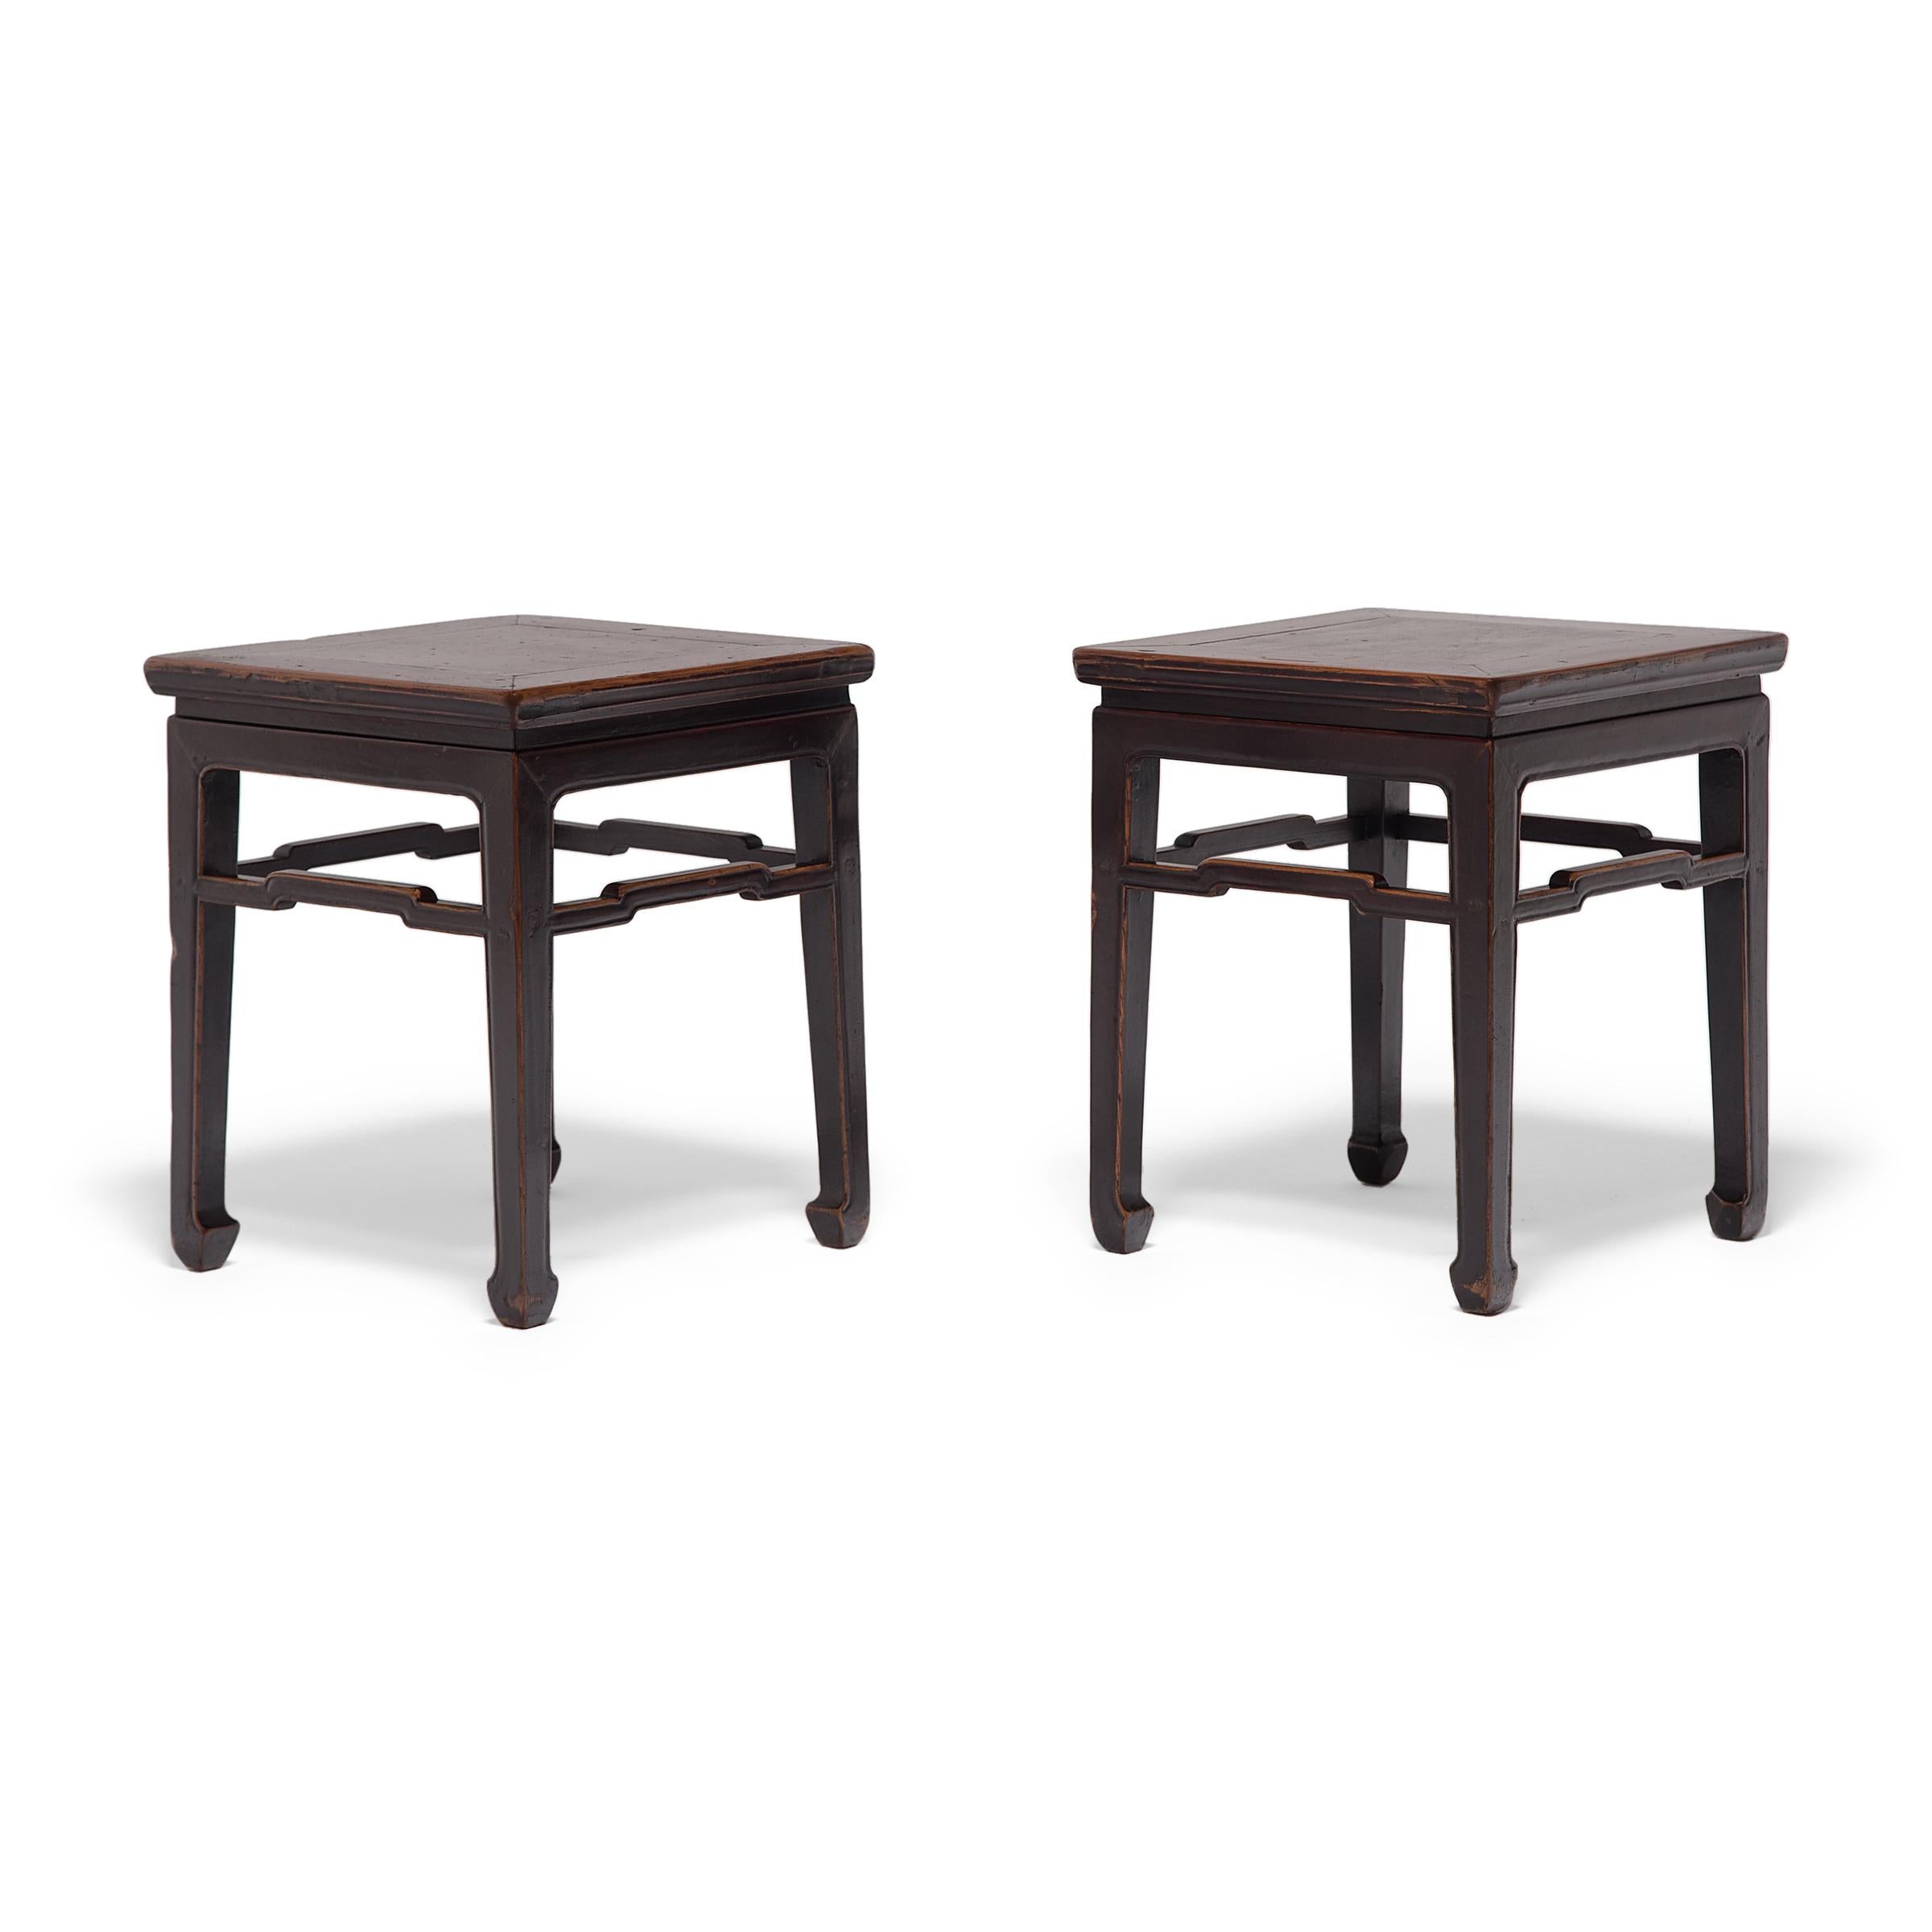 Qing Pair of Chinese Square Stools with Humpback Stretchers, c. 1850